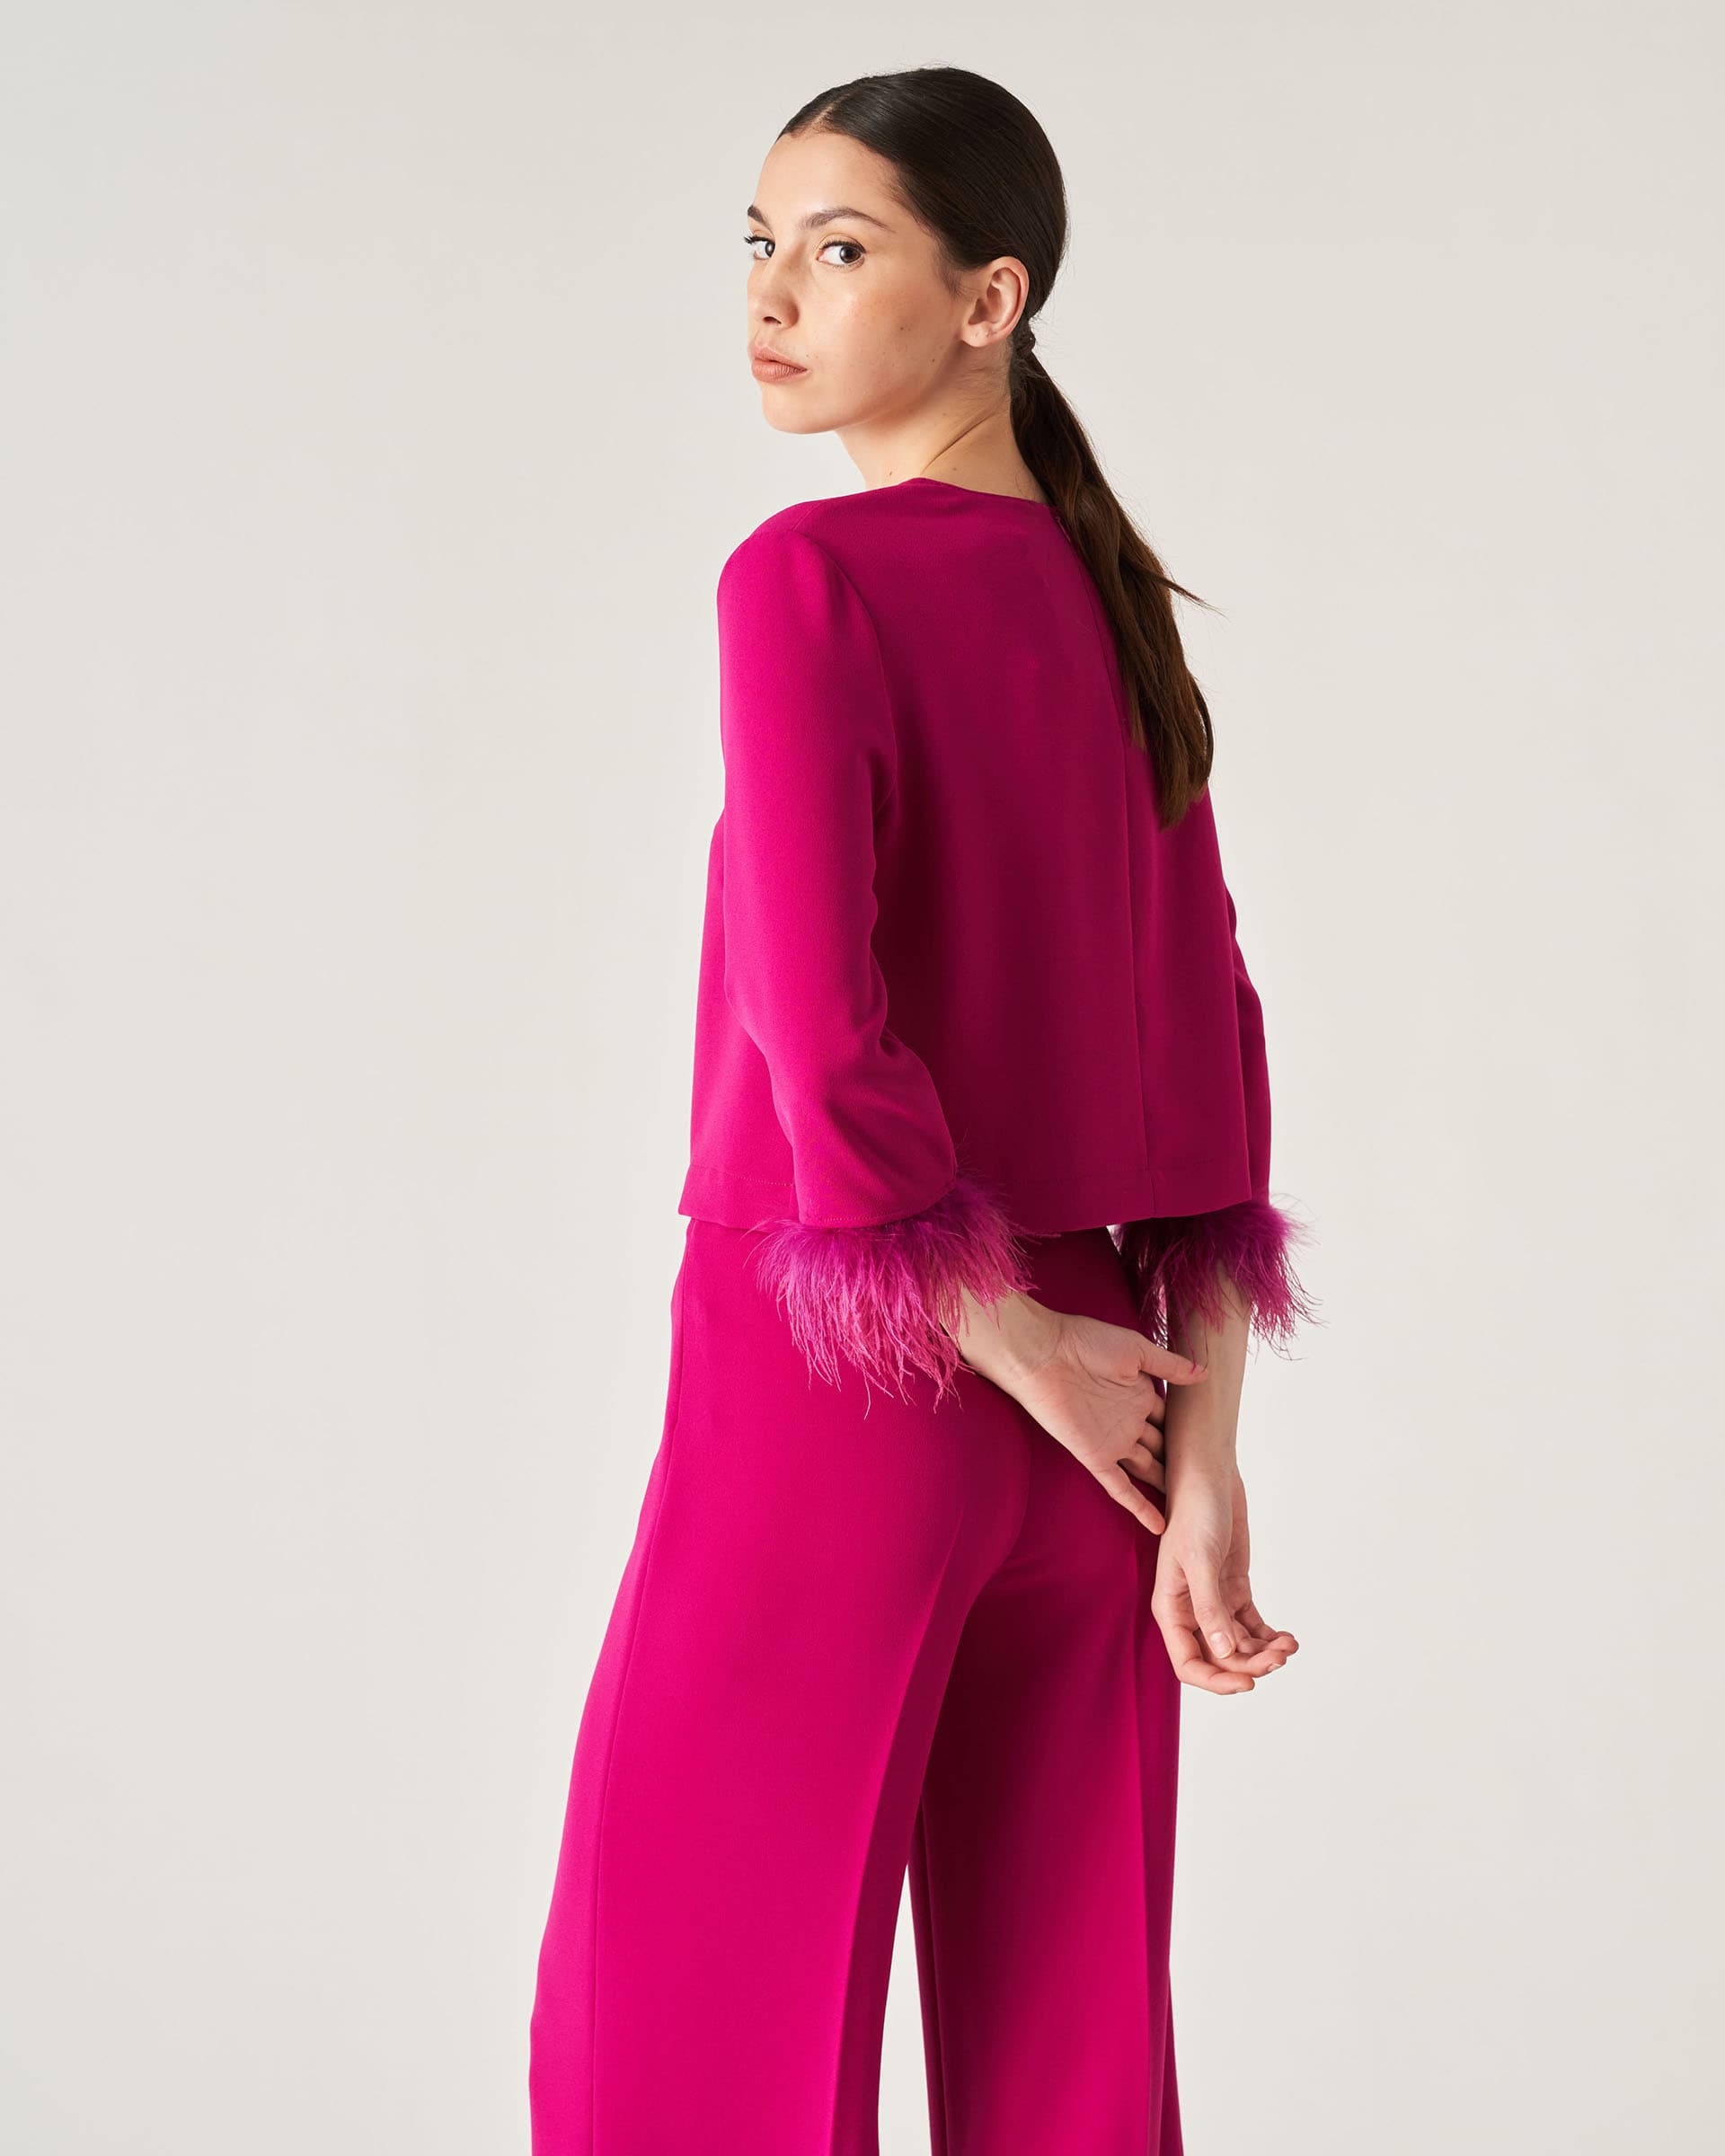 The Market Store | Blouse With Feathers